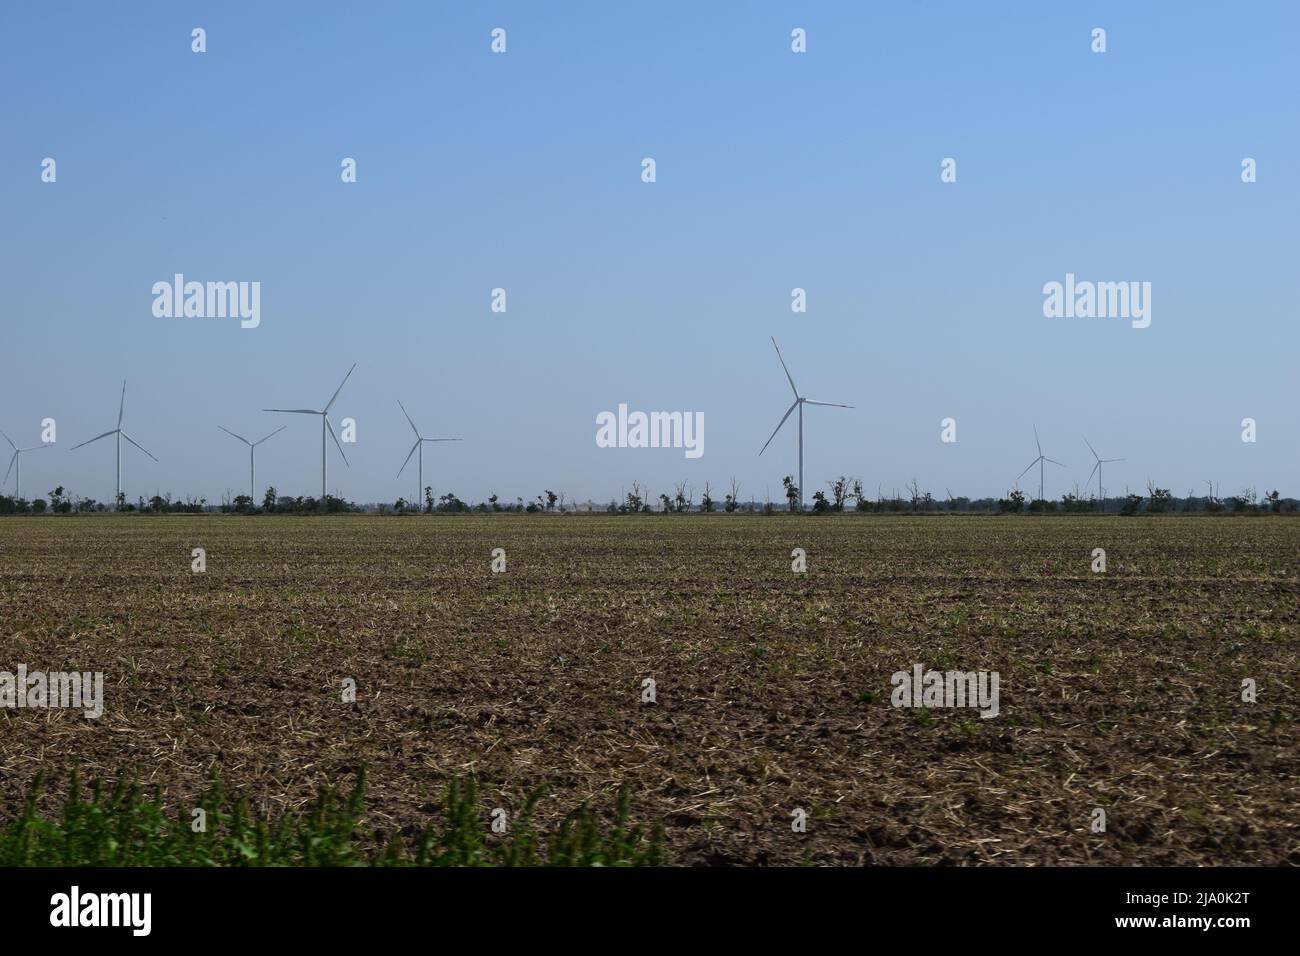 A field of windmills spin in front of a colorful evening sky. A wind turbine is used to produce electricity. Wind energy is the use of wind for electr Stock Photo